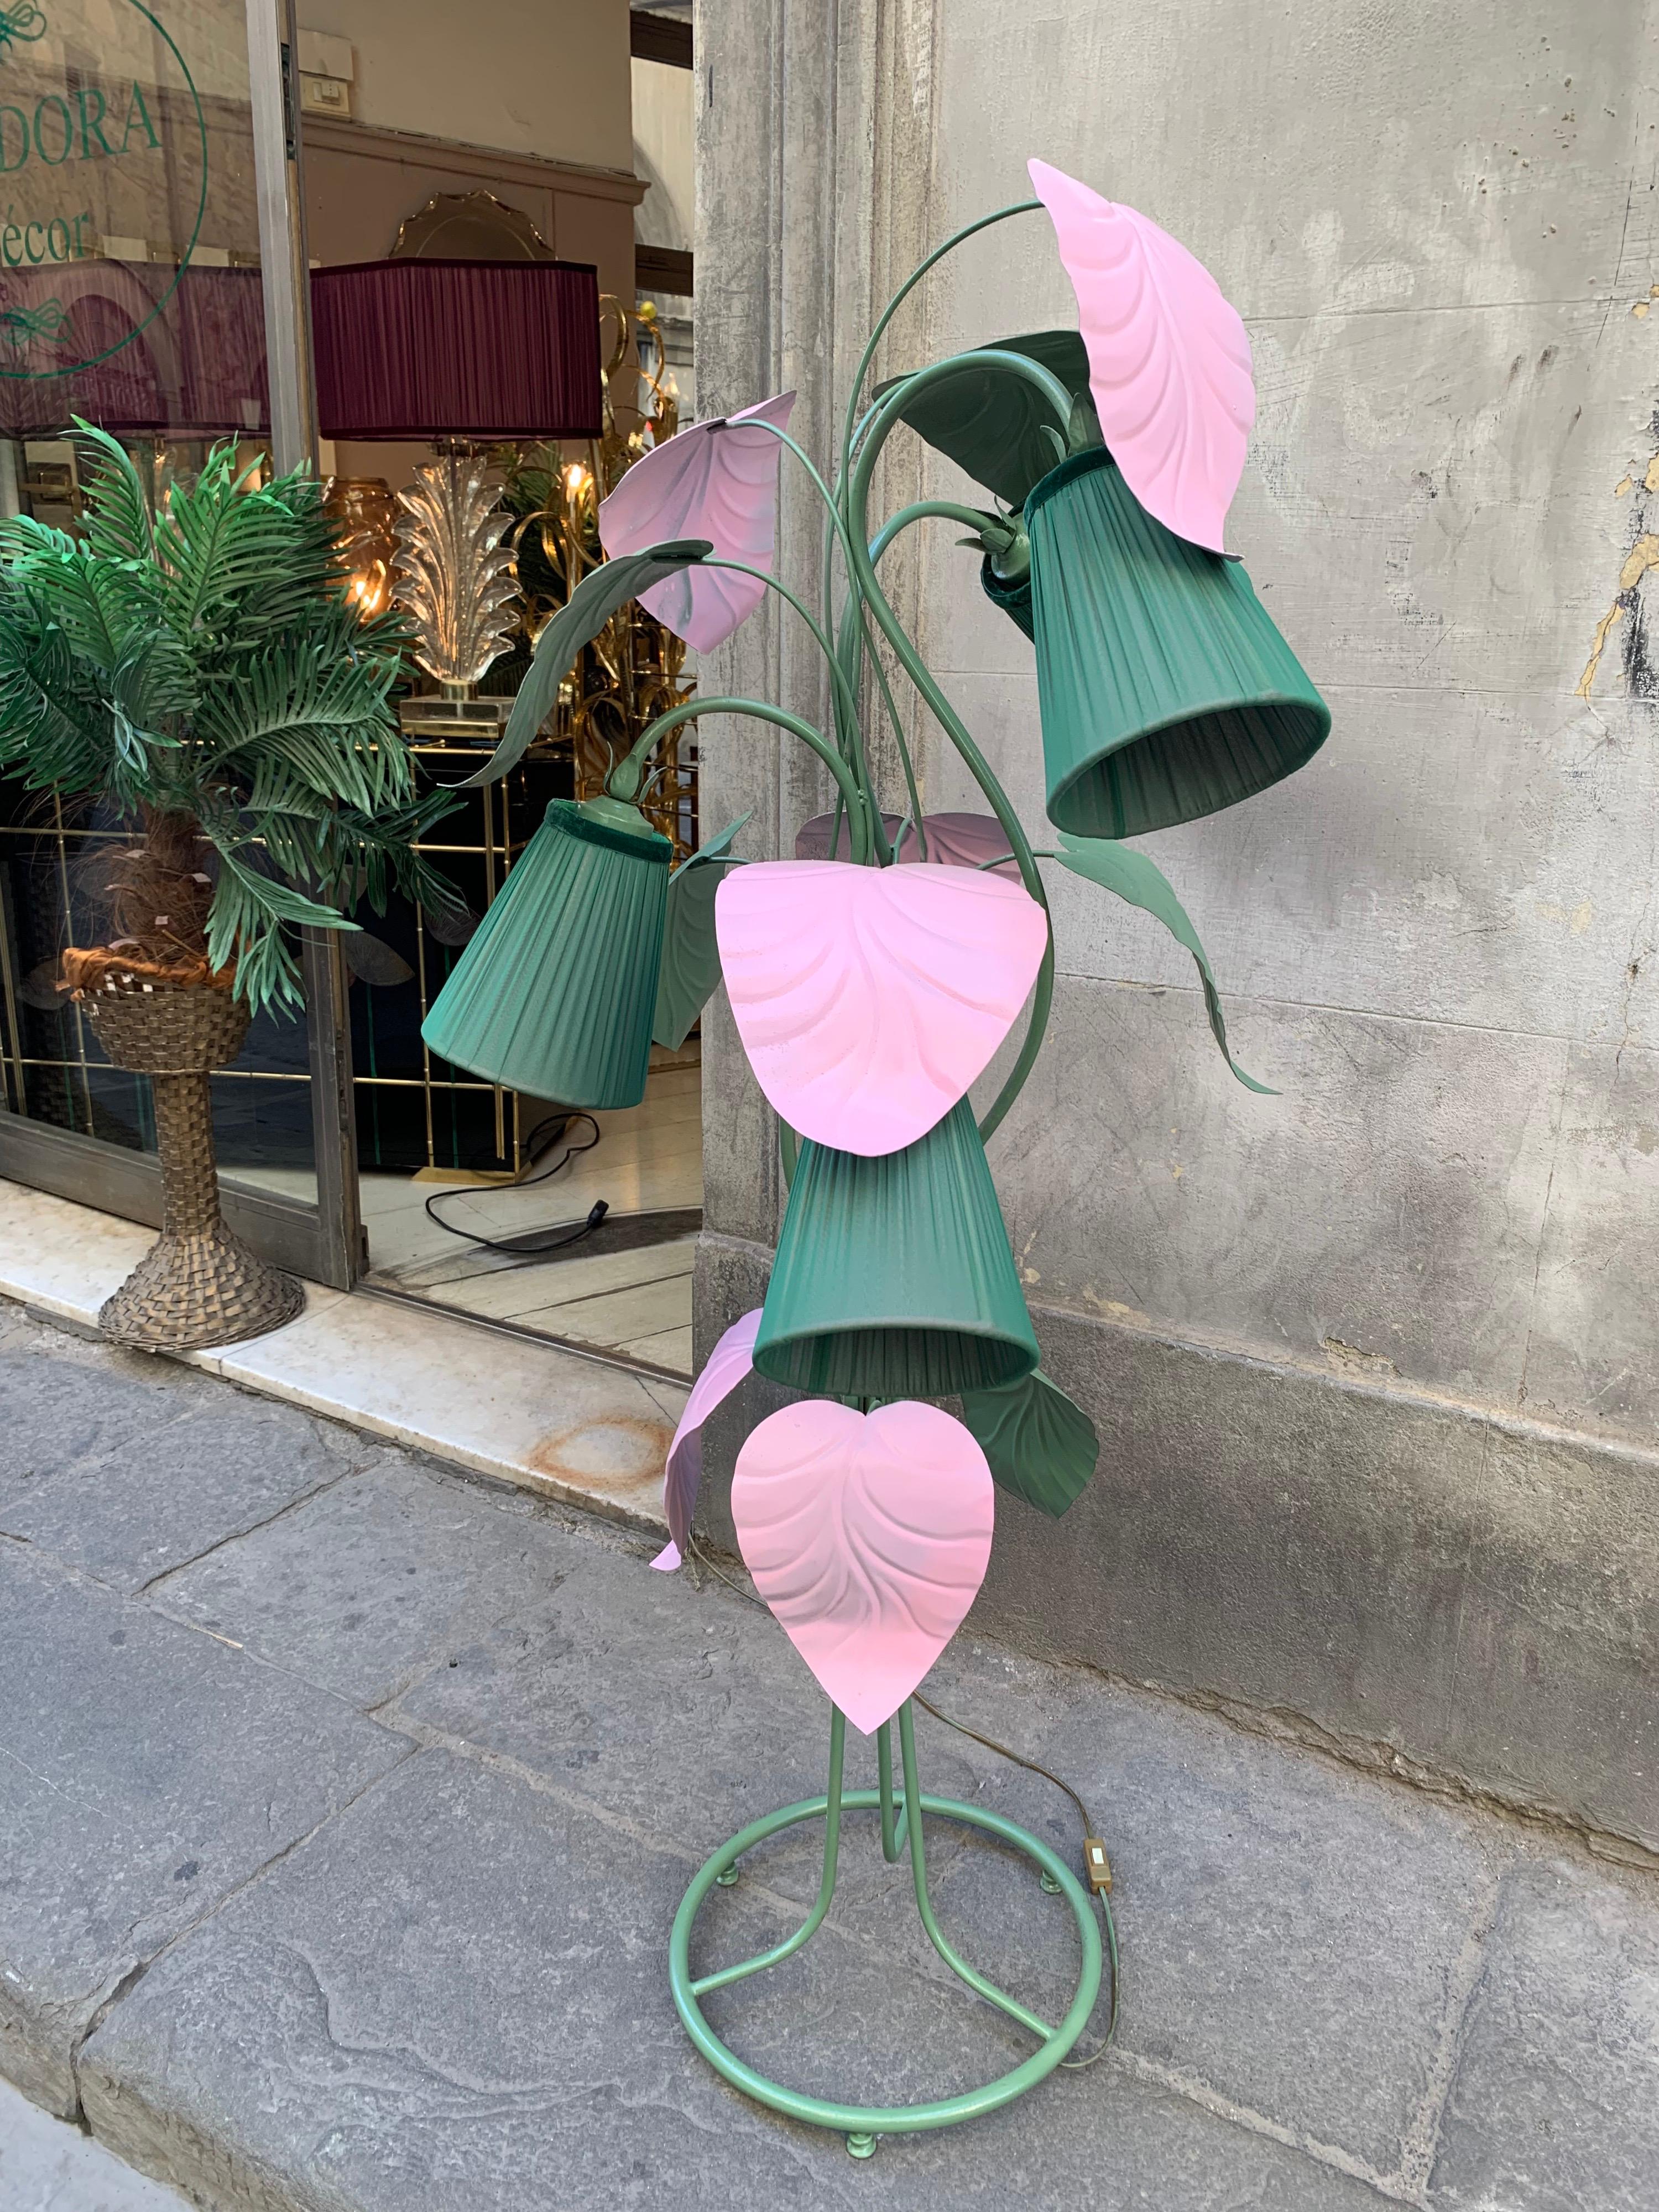 Enlightening pink and green metal plant floor lamp with our hand-sewn double color lampshades.
The structure is made of green and pink lacquered metal. High decorative mid-century object that works both as a lamp and as a sculpture.
4 light bulbs